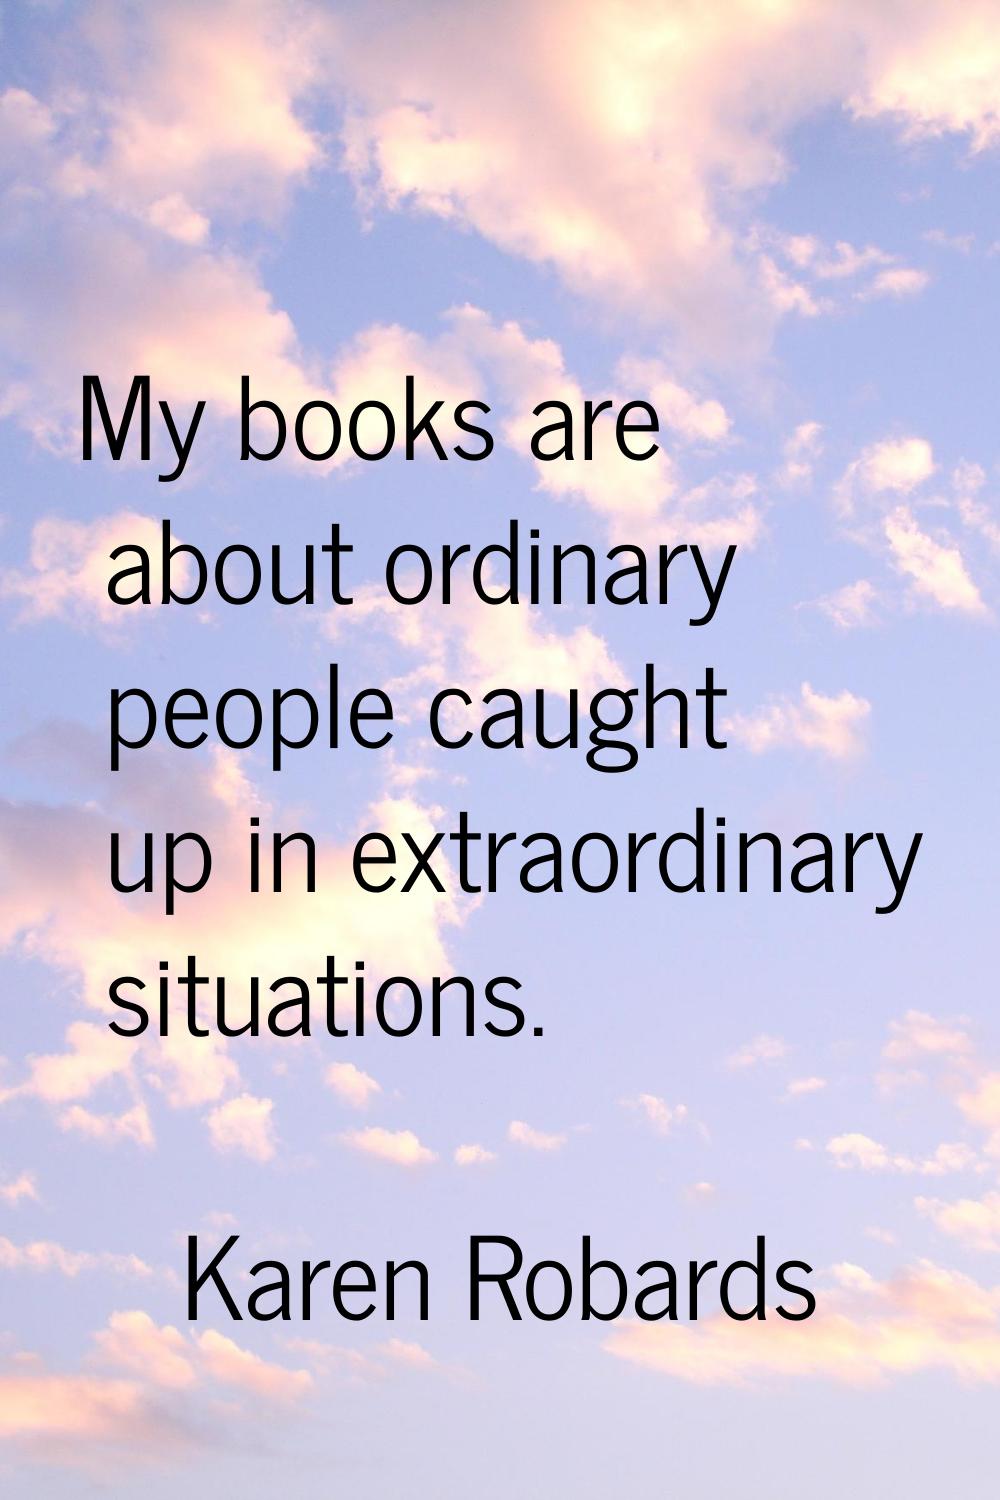 My books are about ordinary people caught up in extraordinary situations.